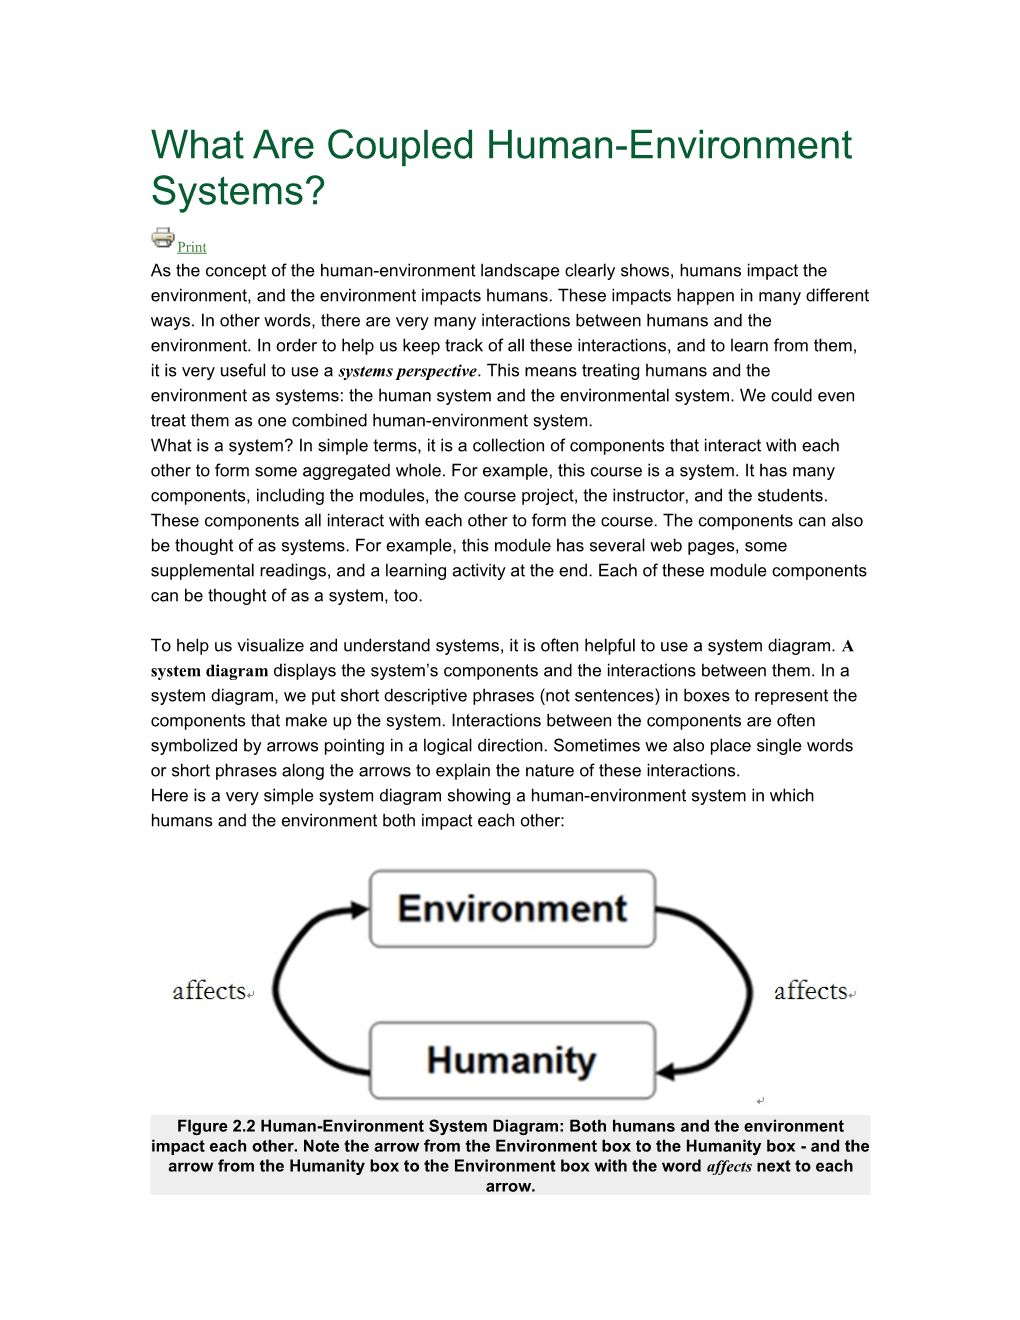 What Are Coupled Human-Environment Systems?